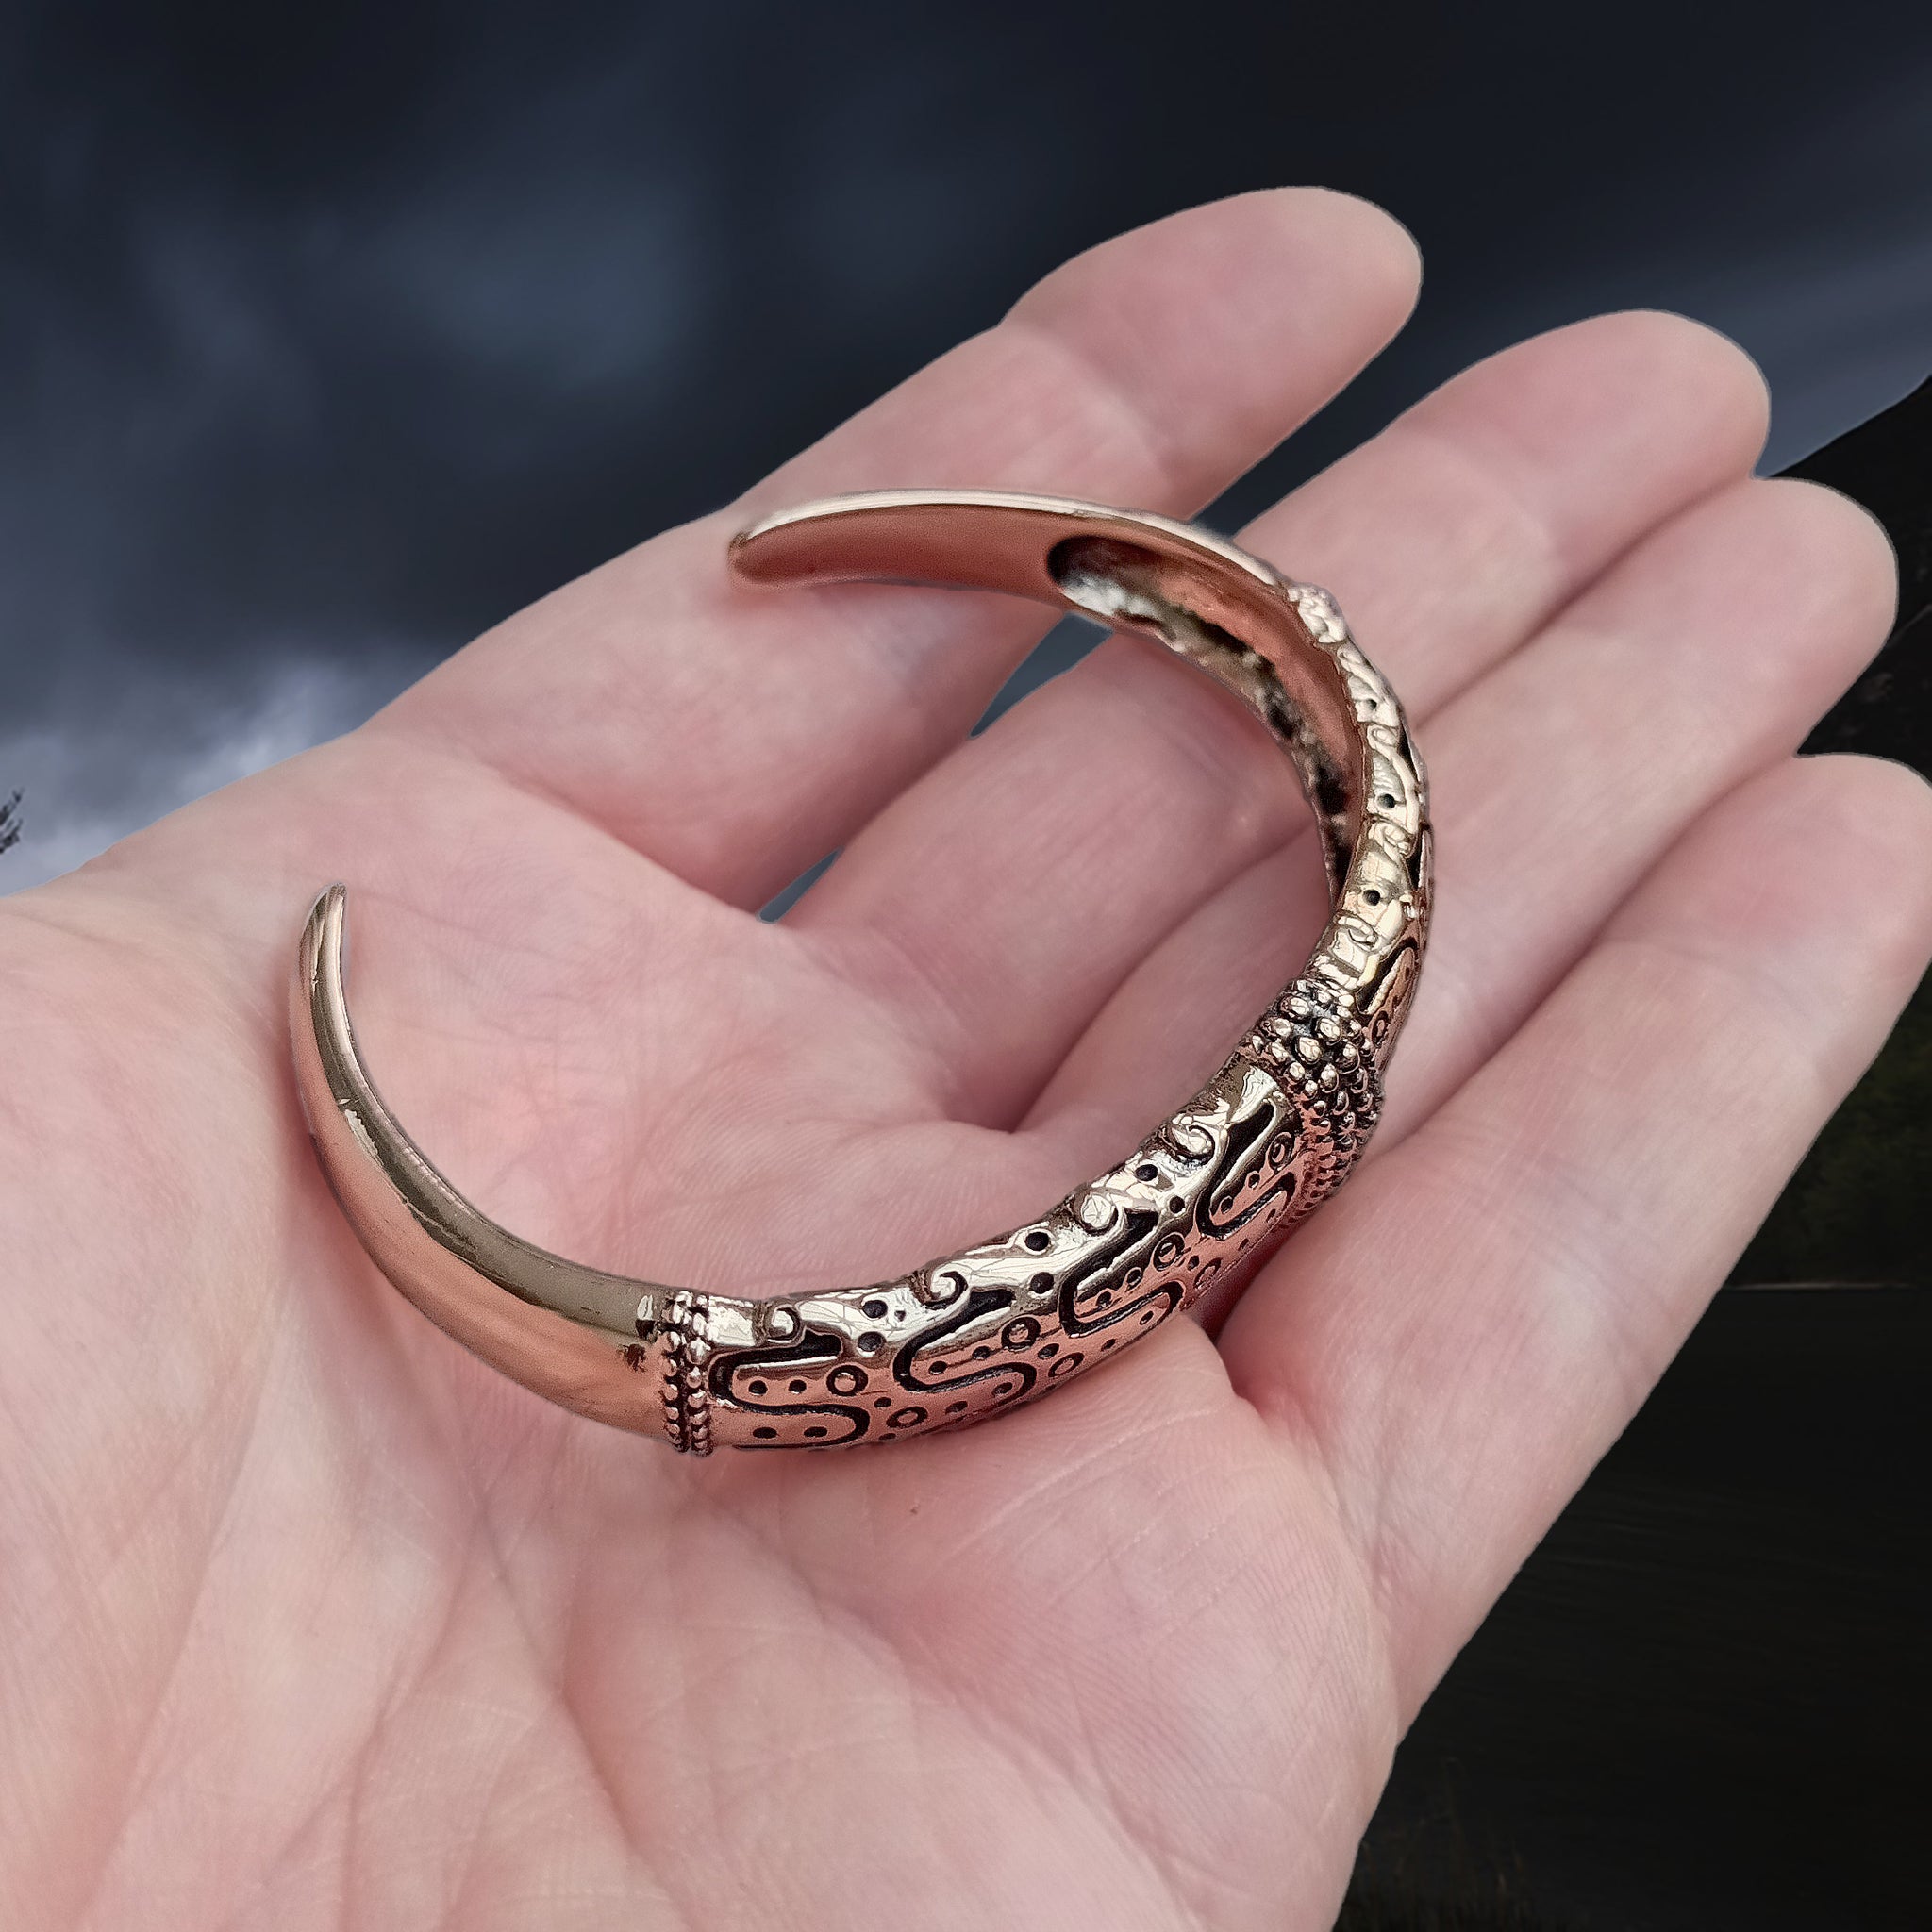 Danish Viking Bronze Bracelet from Falster on Hand - Top Angle View